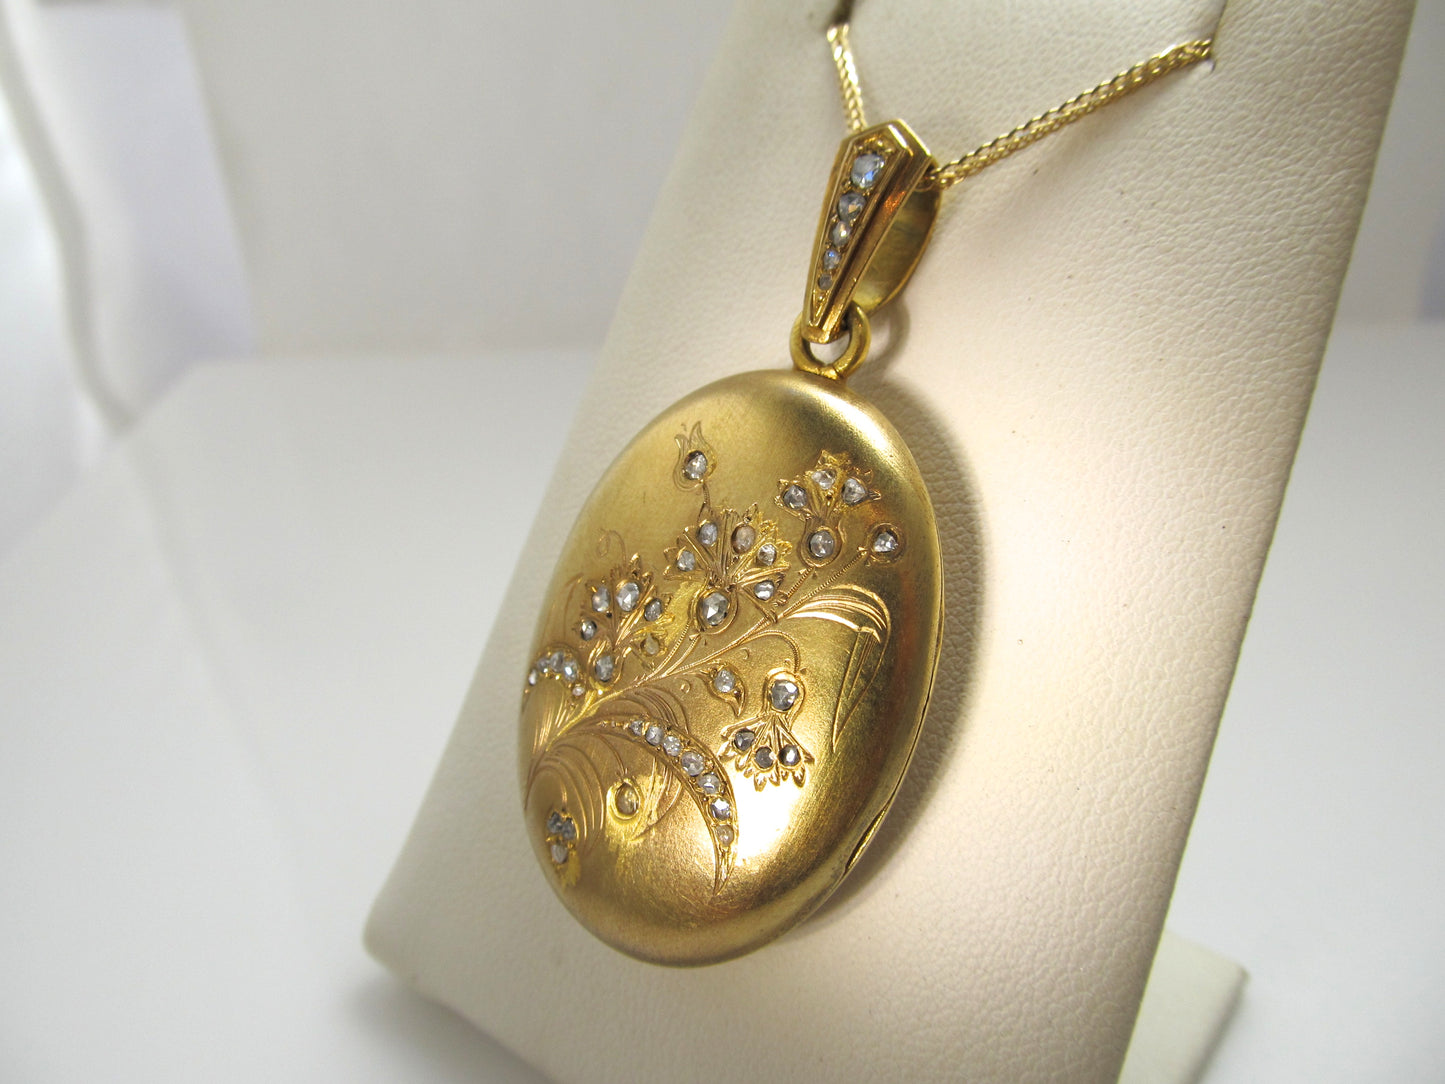 French Victorian 18k locket with rose cut diamonds